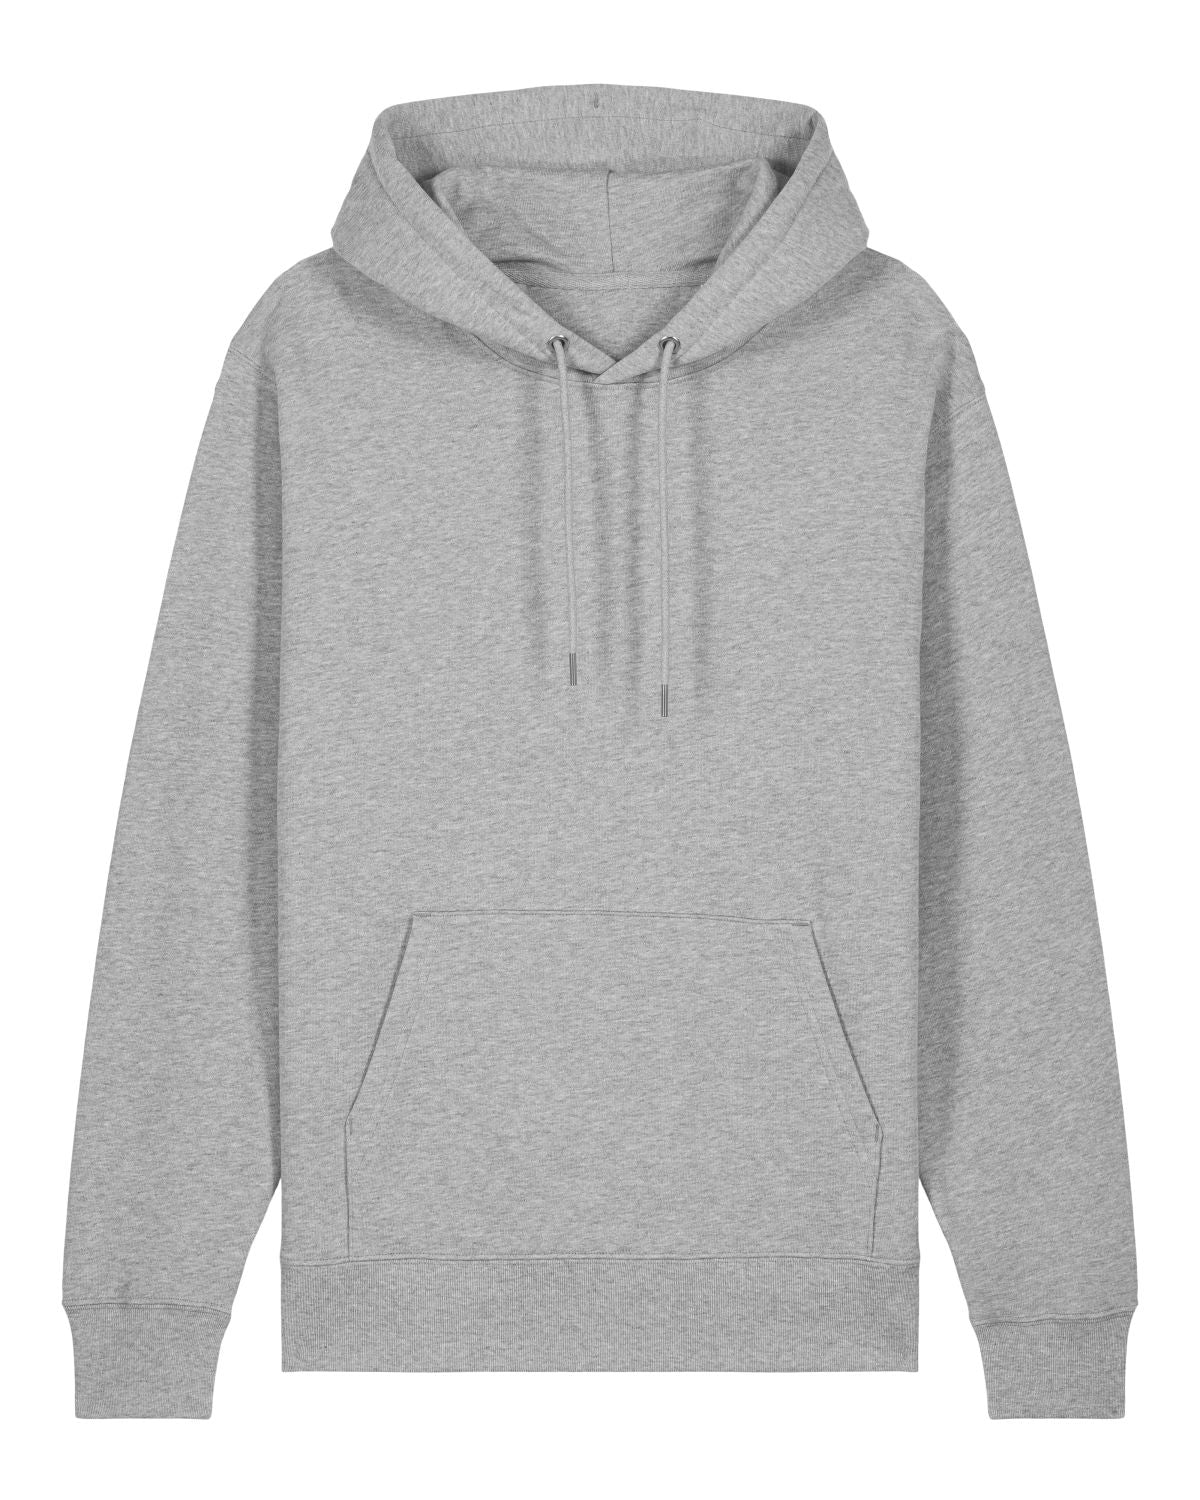 Customize your own sustainable hoodie made of 100% GOTS-certified organic cotton